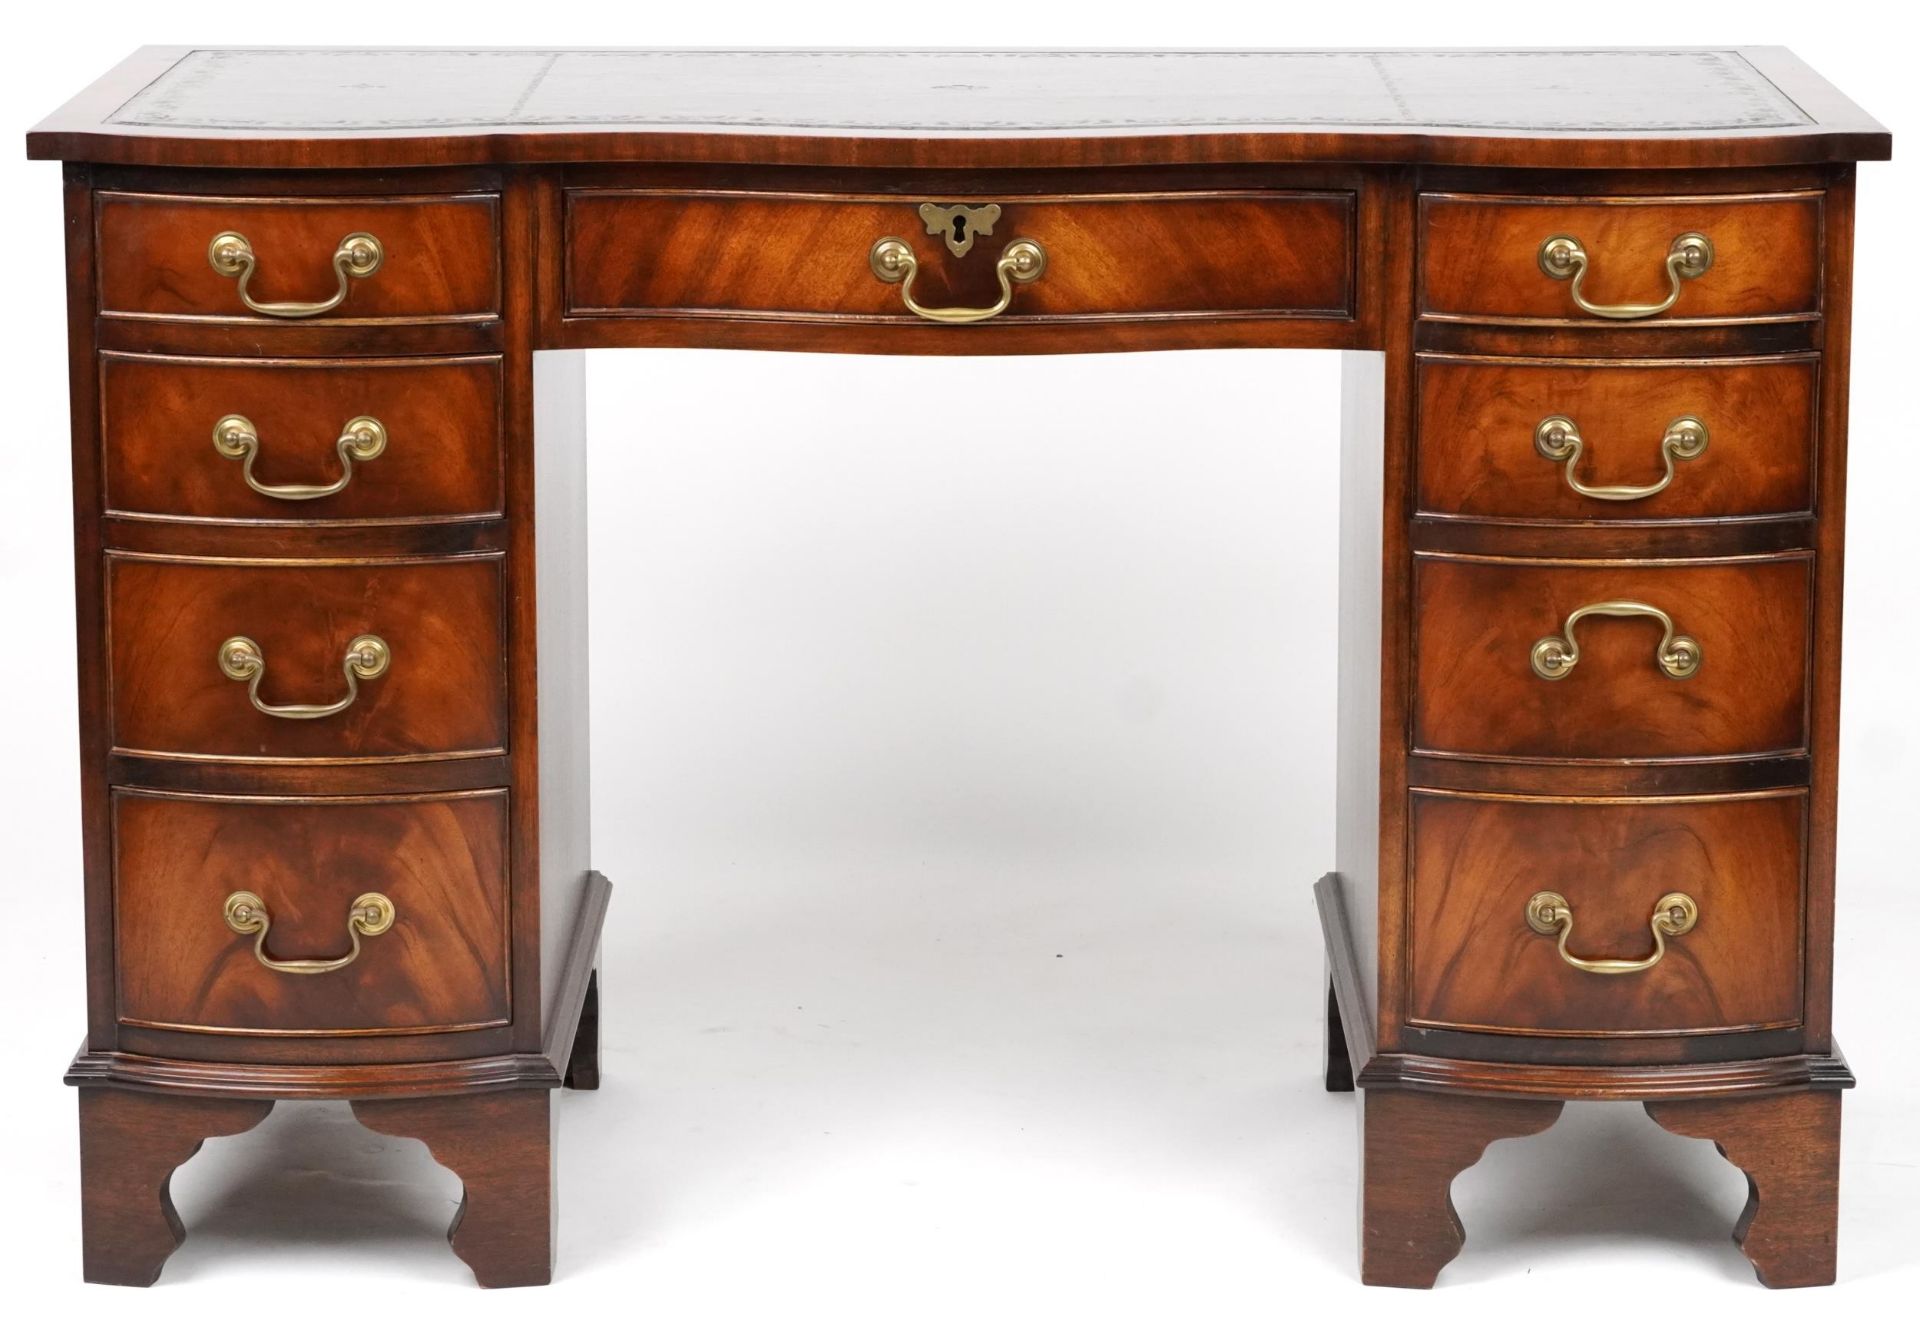 Mahogany serpentine front twin pedestal desk and a mahogany chair, the desk with nine drawers and - Image 3 of 9